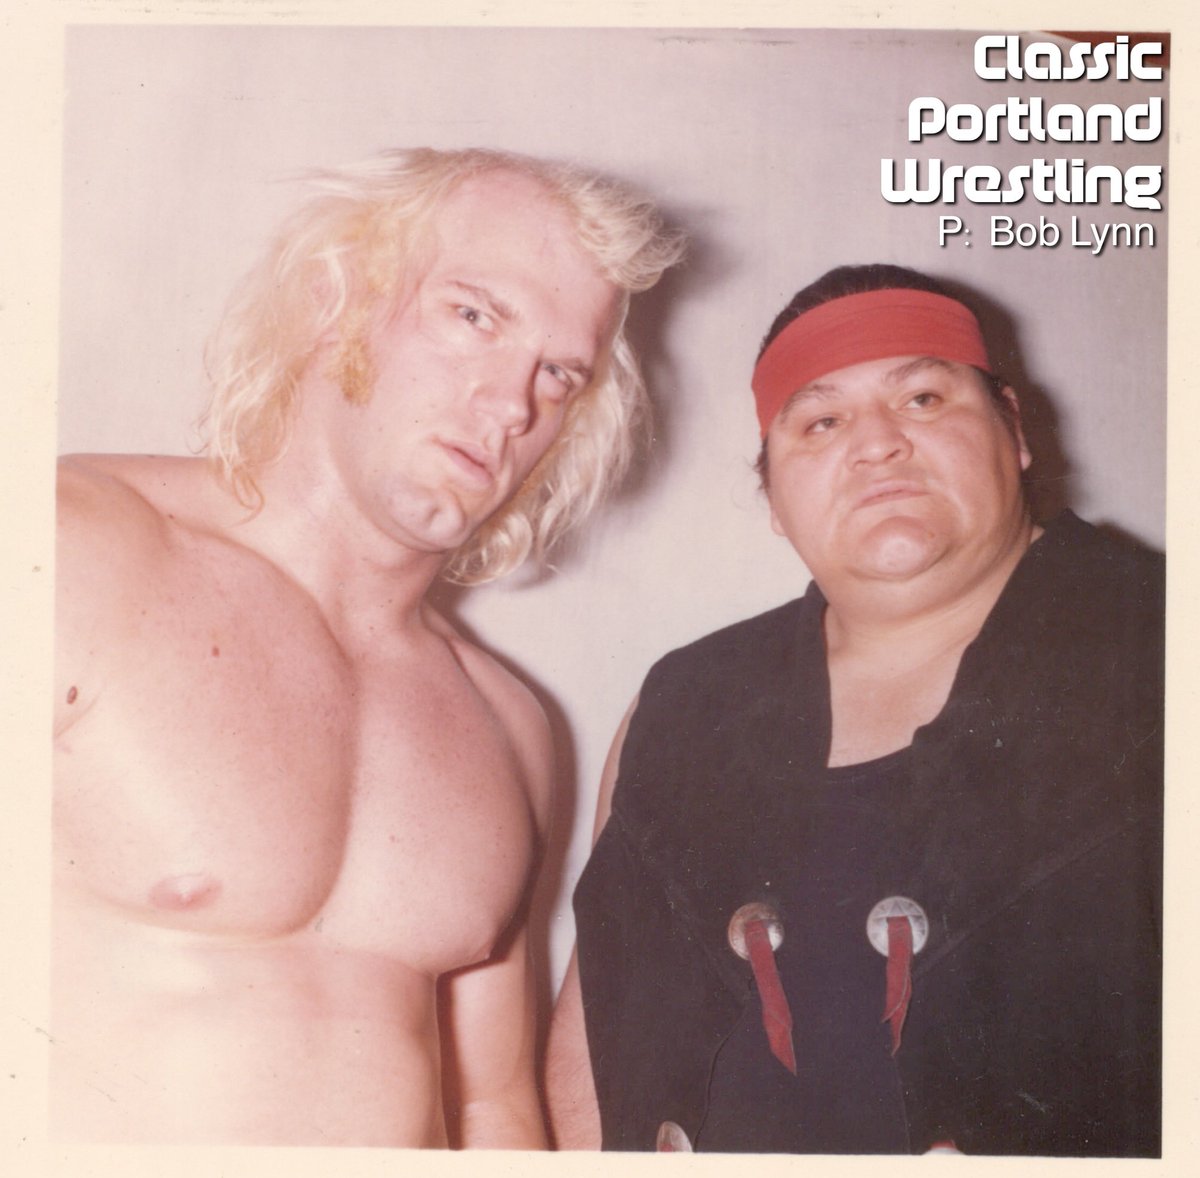 Another photo from the Bob Lynn archive of Jesse Ventura with tag partner Bull Ramos. Again, this is likely from ‘76. @GovJVentura #portlandwrestling #nwa #nwawrestling #jesseventura #jessethebodyventura #bullramos #apachebullramos #boblynn #donowen #portlandsportsarena